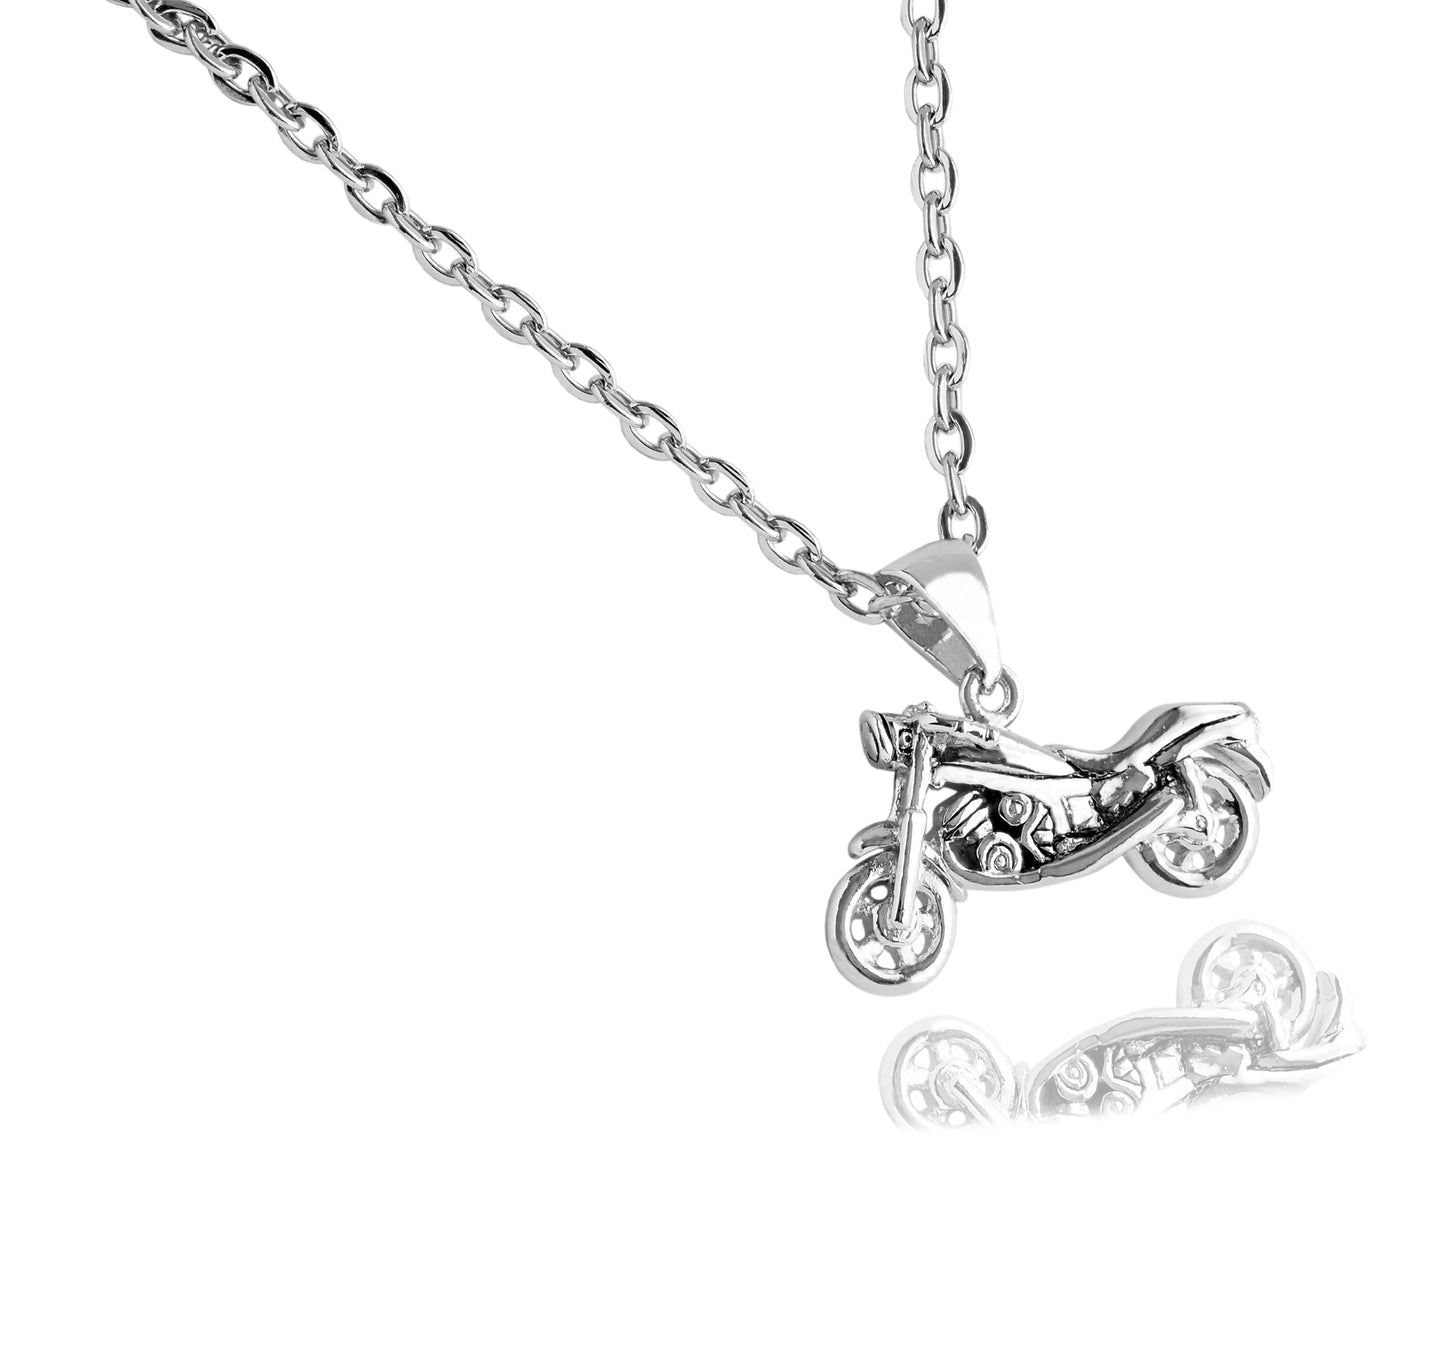 Quinnlyn & Co. Motorcycle Pendant Necklace for Women, Motivational Gifts Graduation Jewelry with Greeting Card, Silver Tone